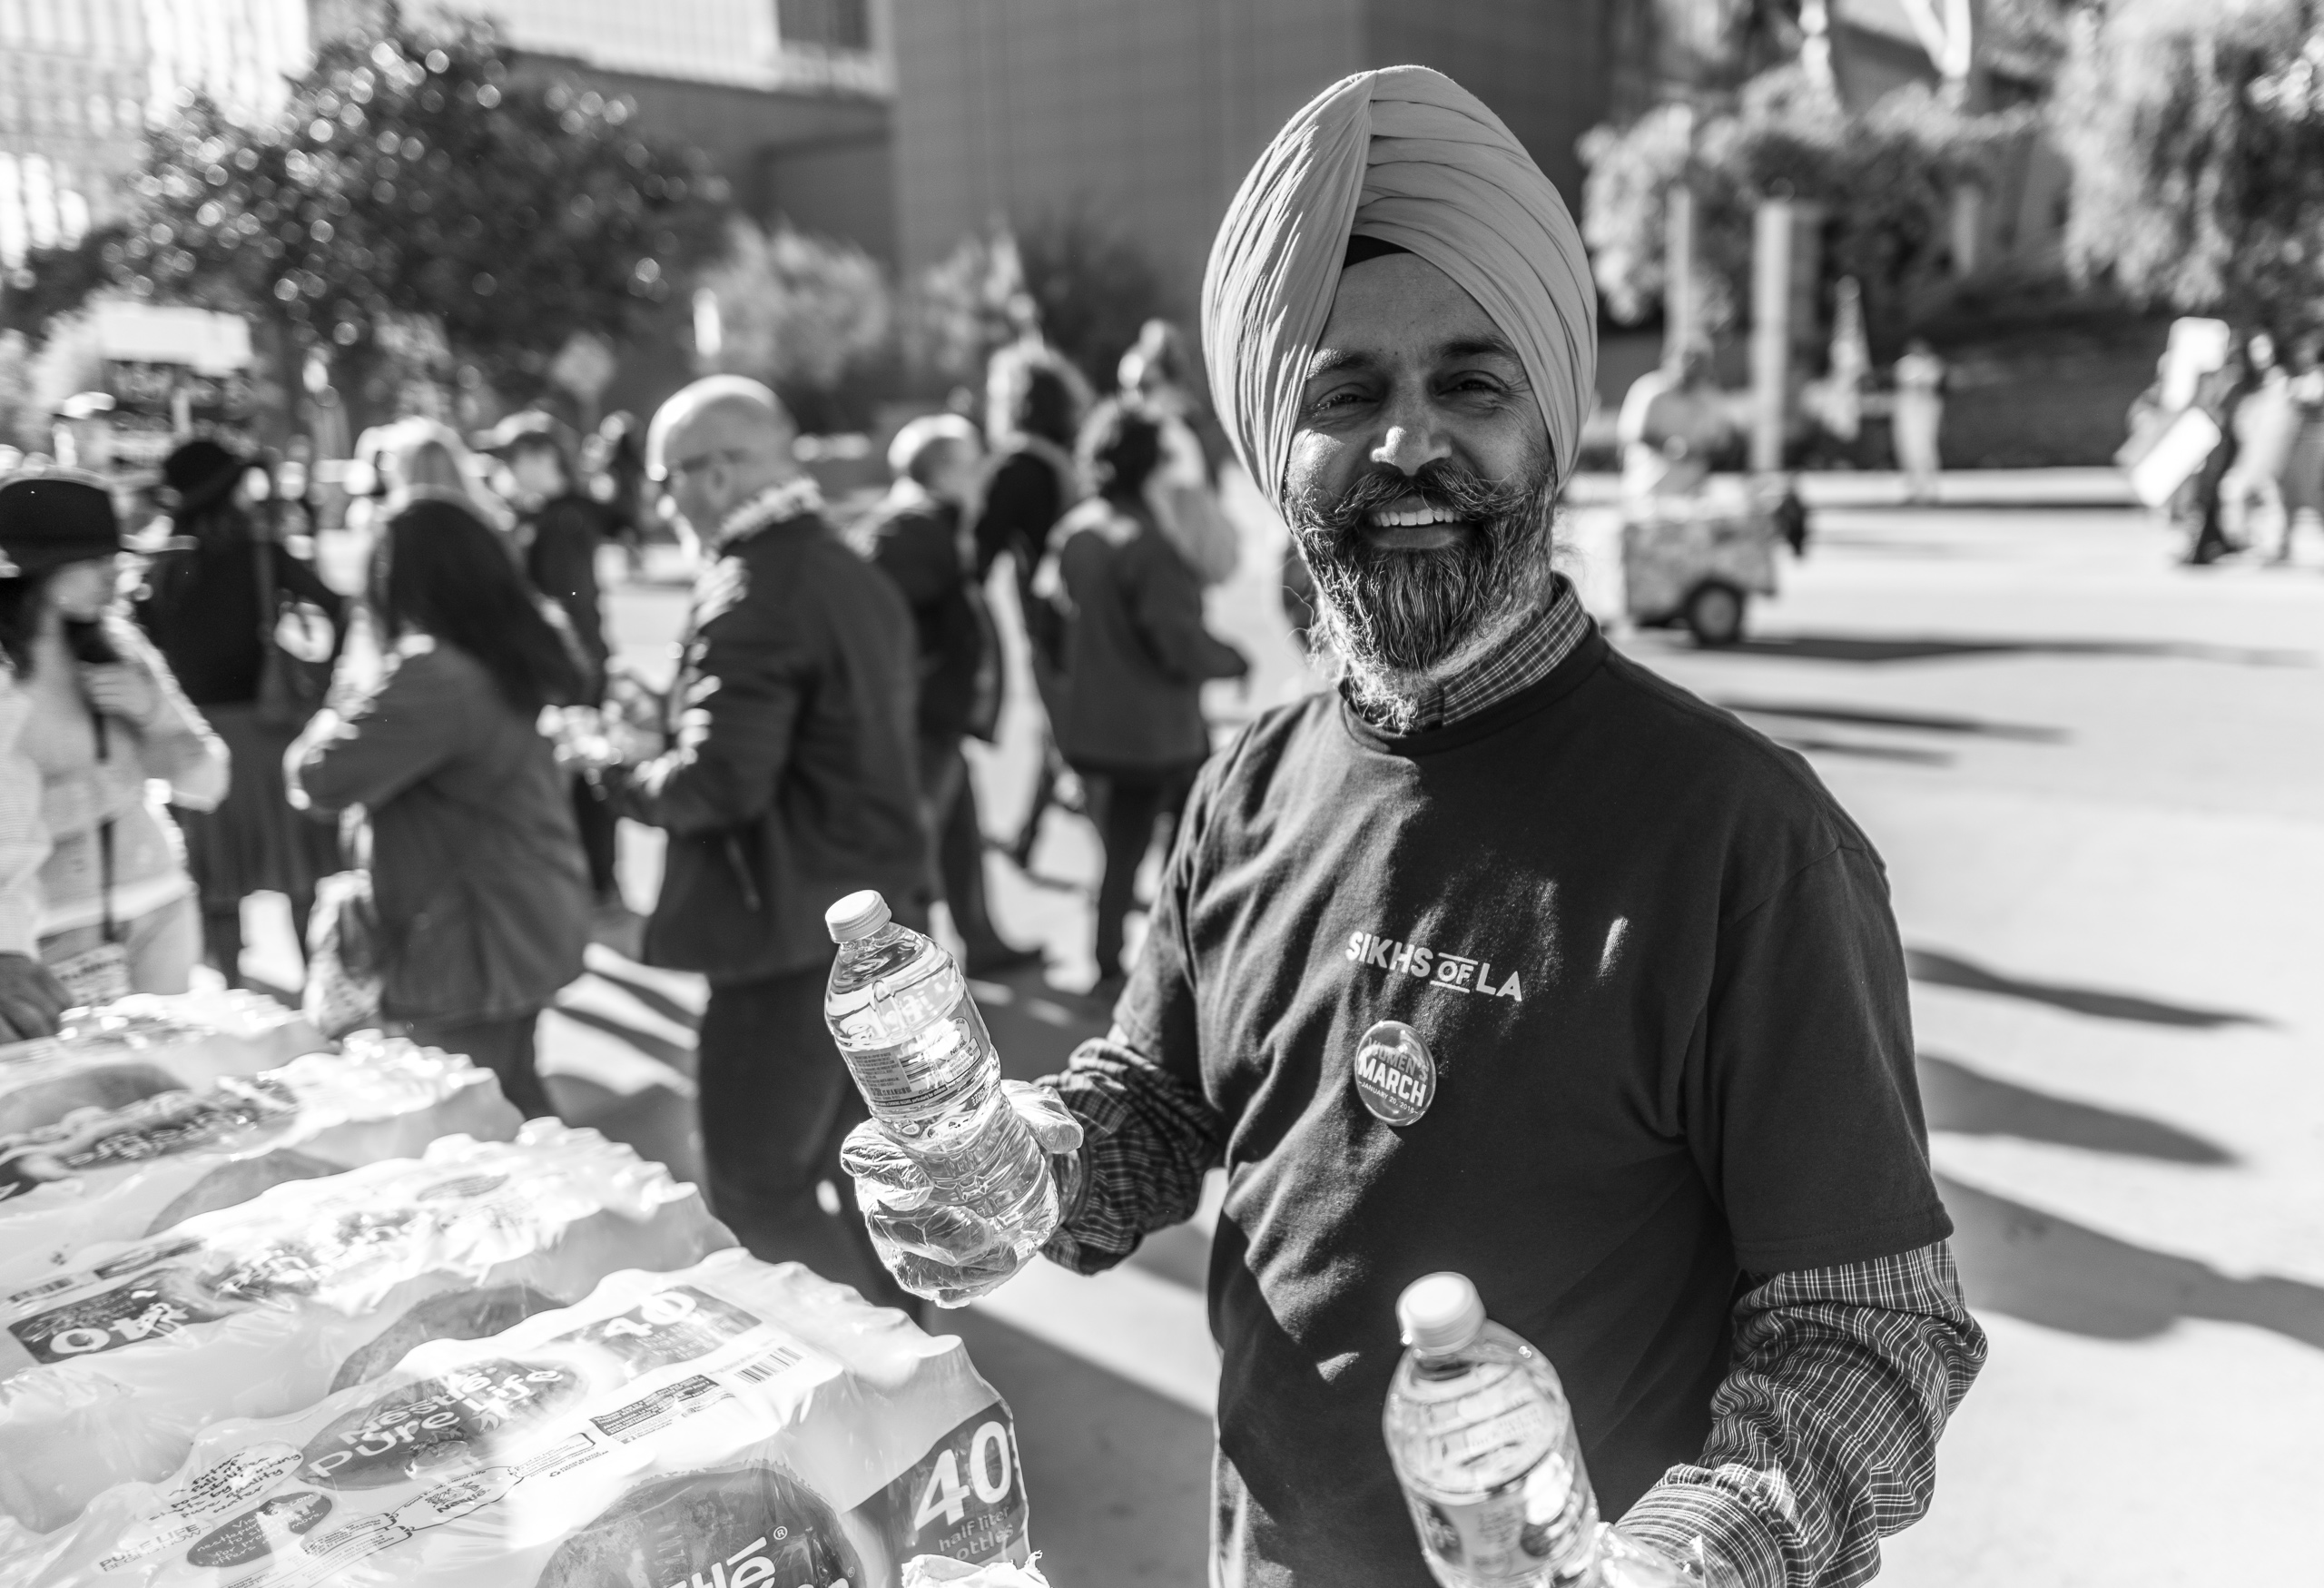 a man in a Sikhs of LA t-shirt and wearing a Women's March button hands out bottles of water to participants in the Women's March Los Angeles 2018